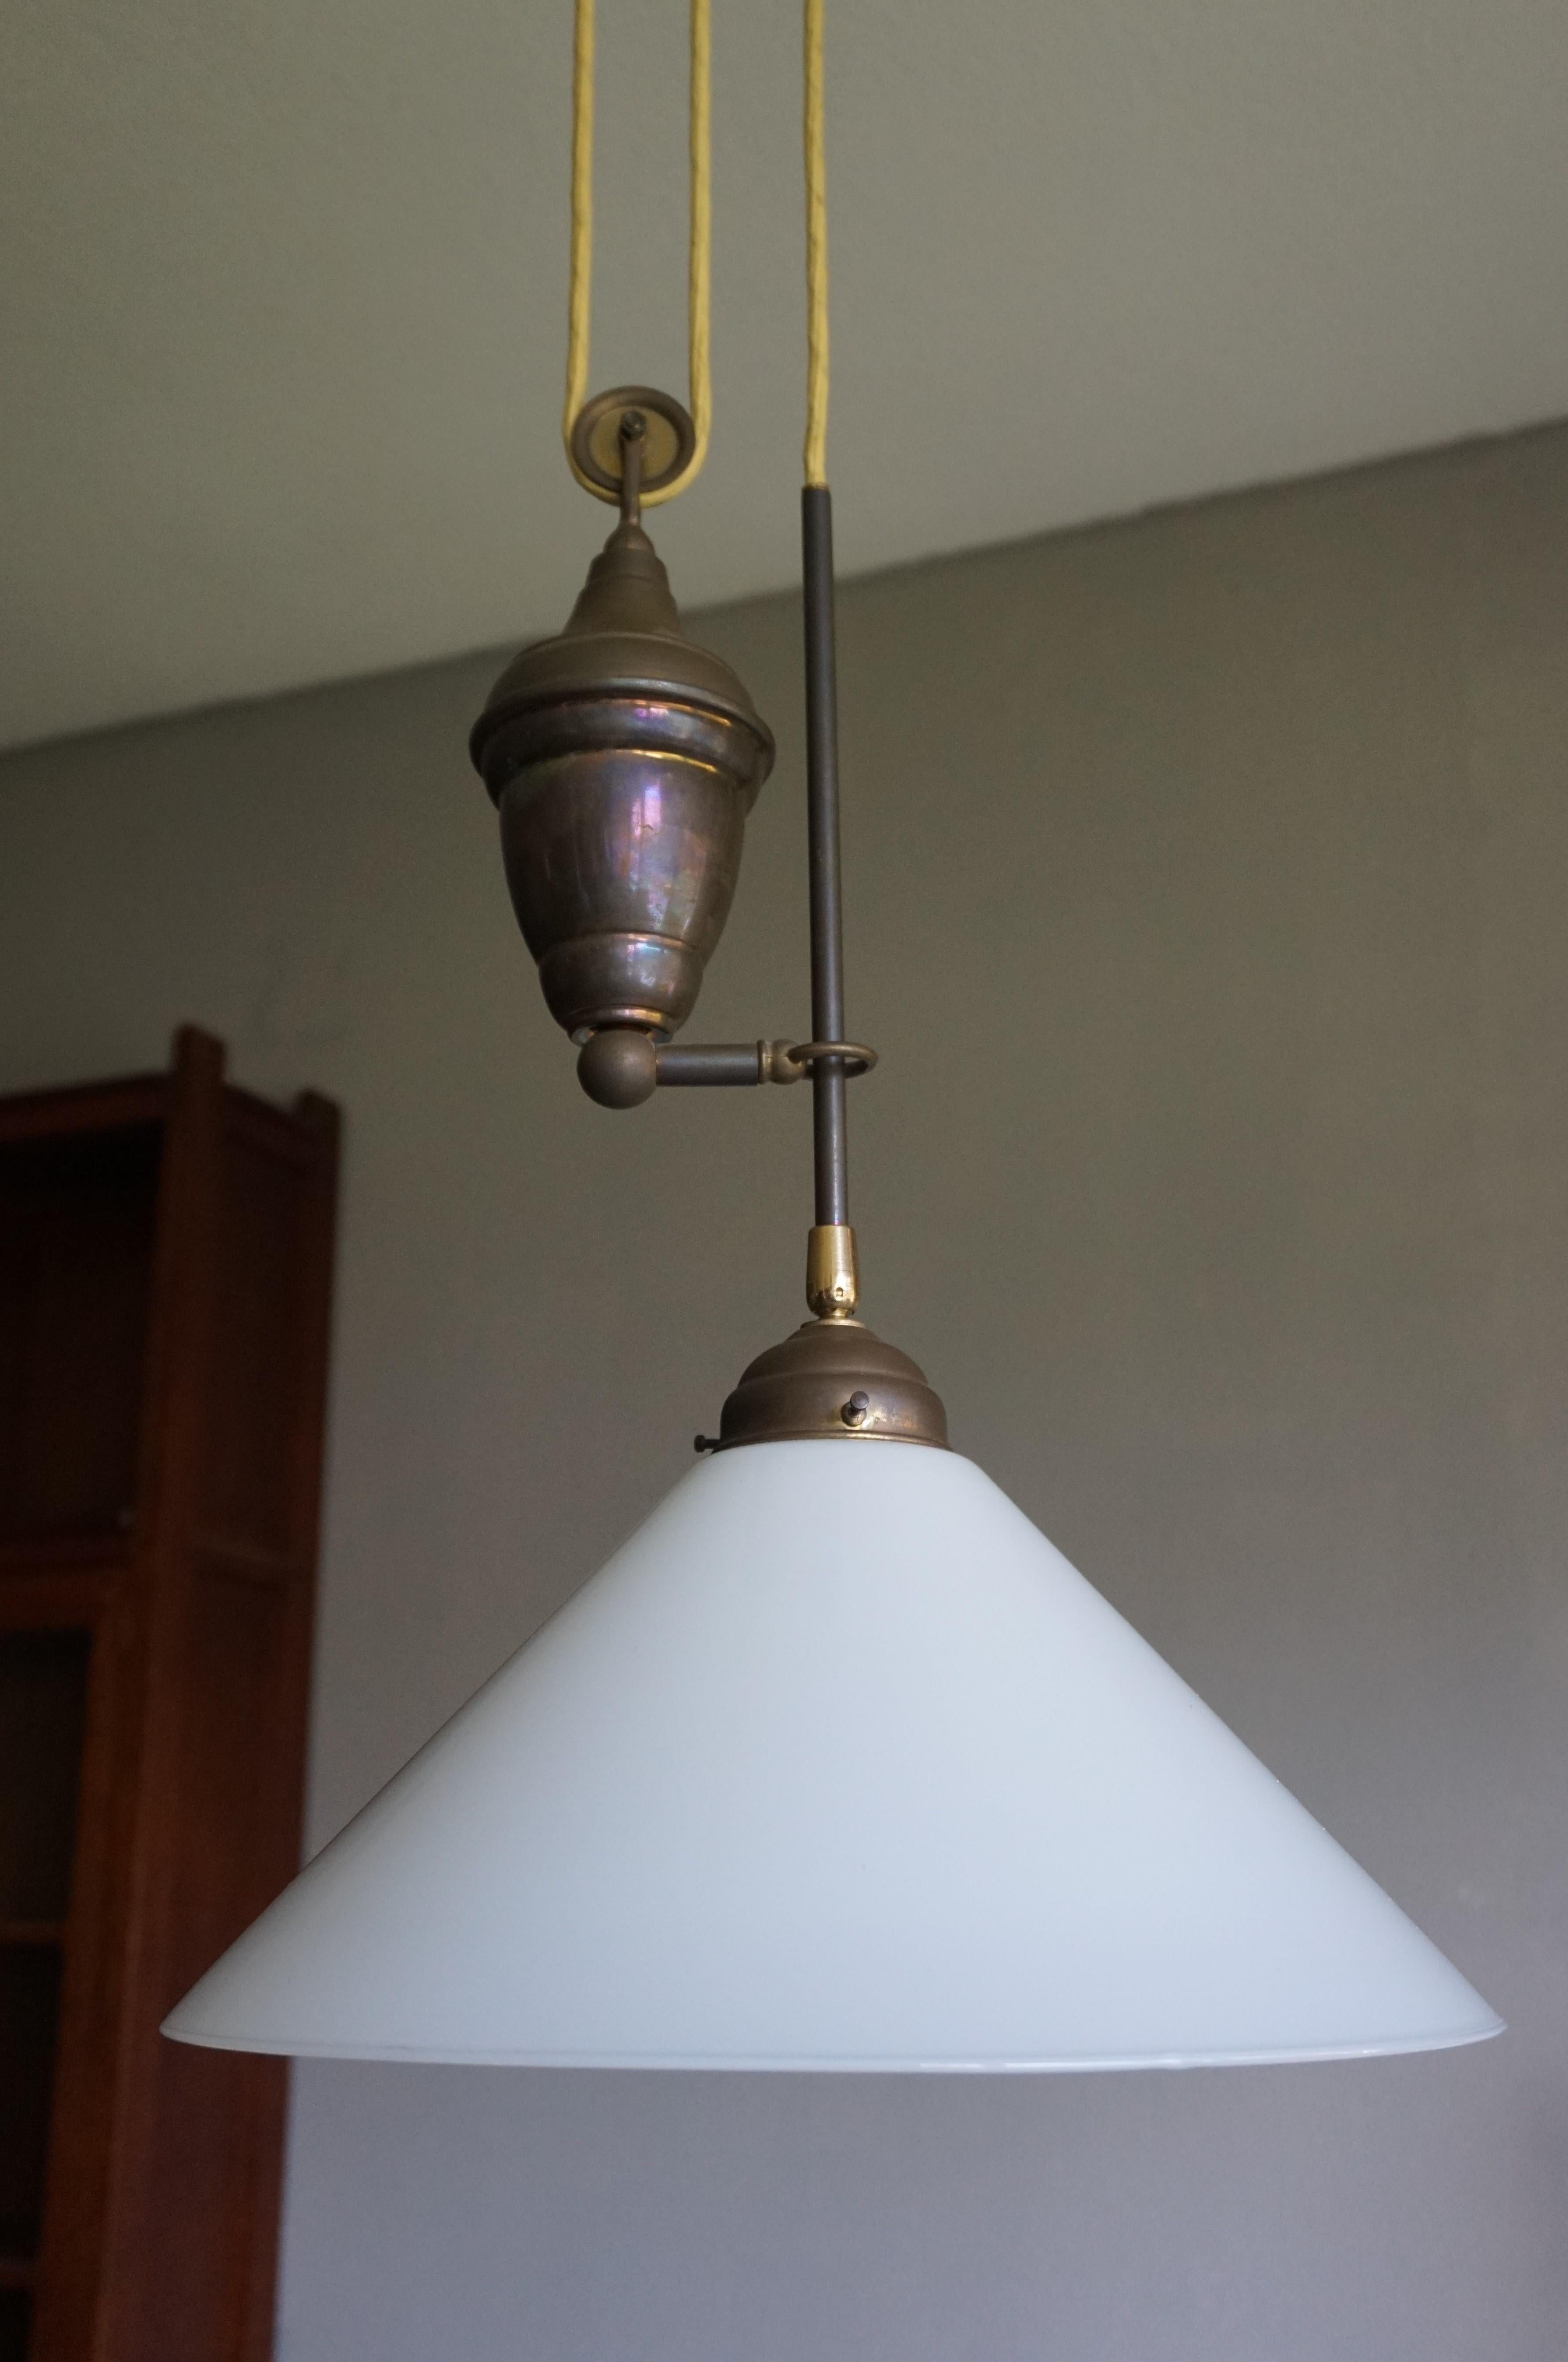 Stylish, midcentury made and height adjustable light fixture.

This rare 1970s light fixture is ideal for bringing good style and the perfect kind of light to your midcentury kitchen, dining area, living room, landing etc. This pendant comes with a